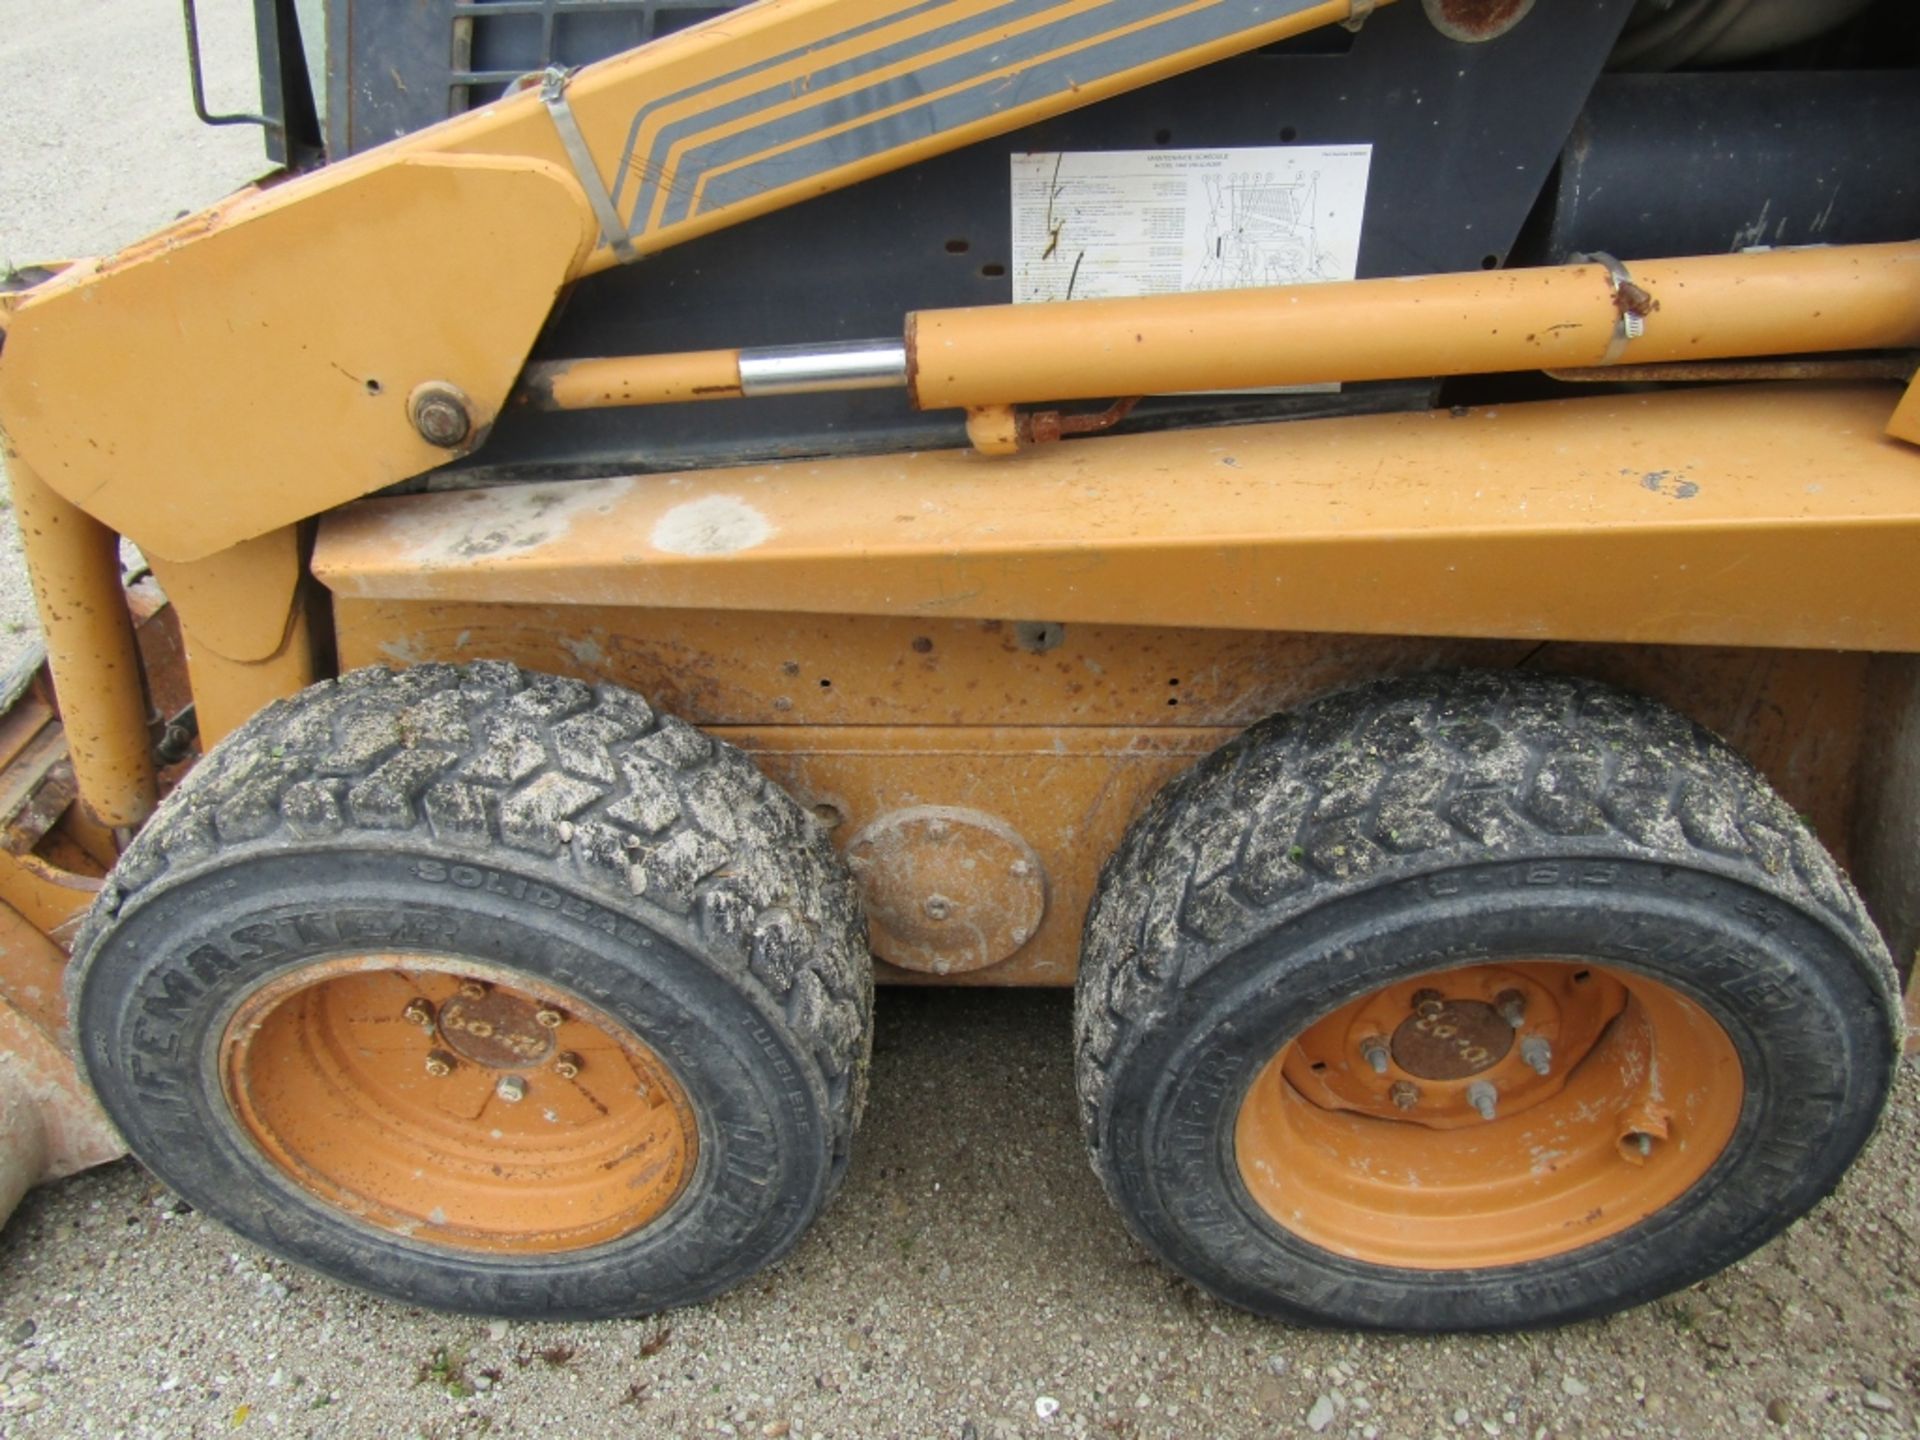 1999 Case 1840 Uni-loader with Bucket, 3517 Hours, ID #JAF0285737, - Image 10 of 12